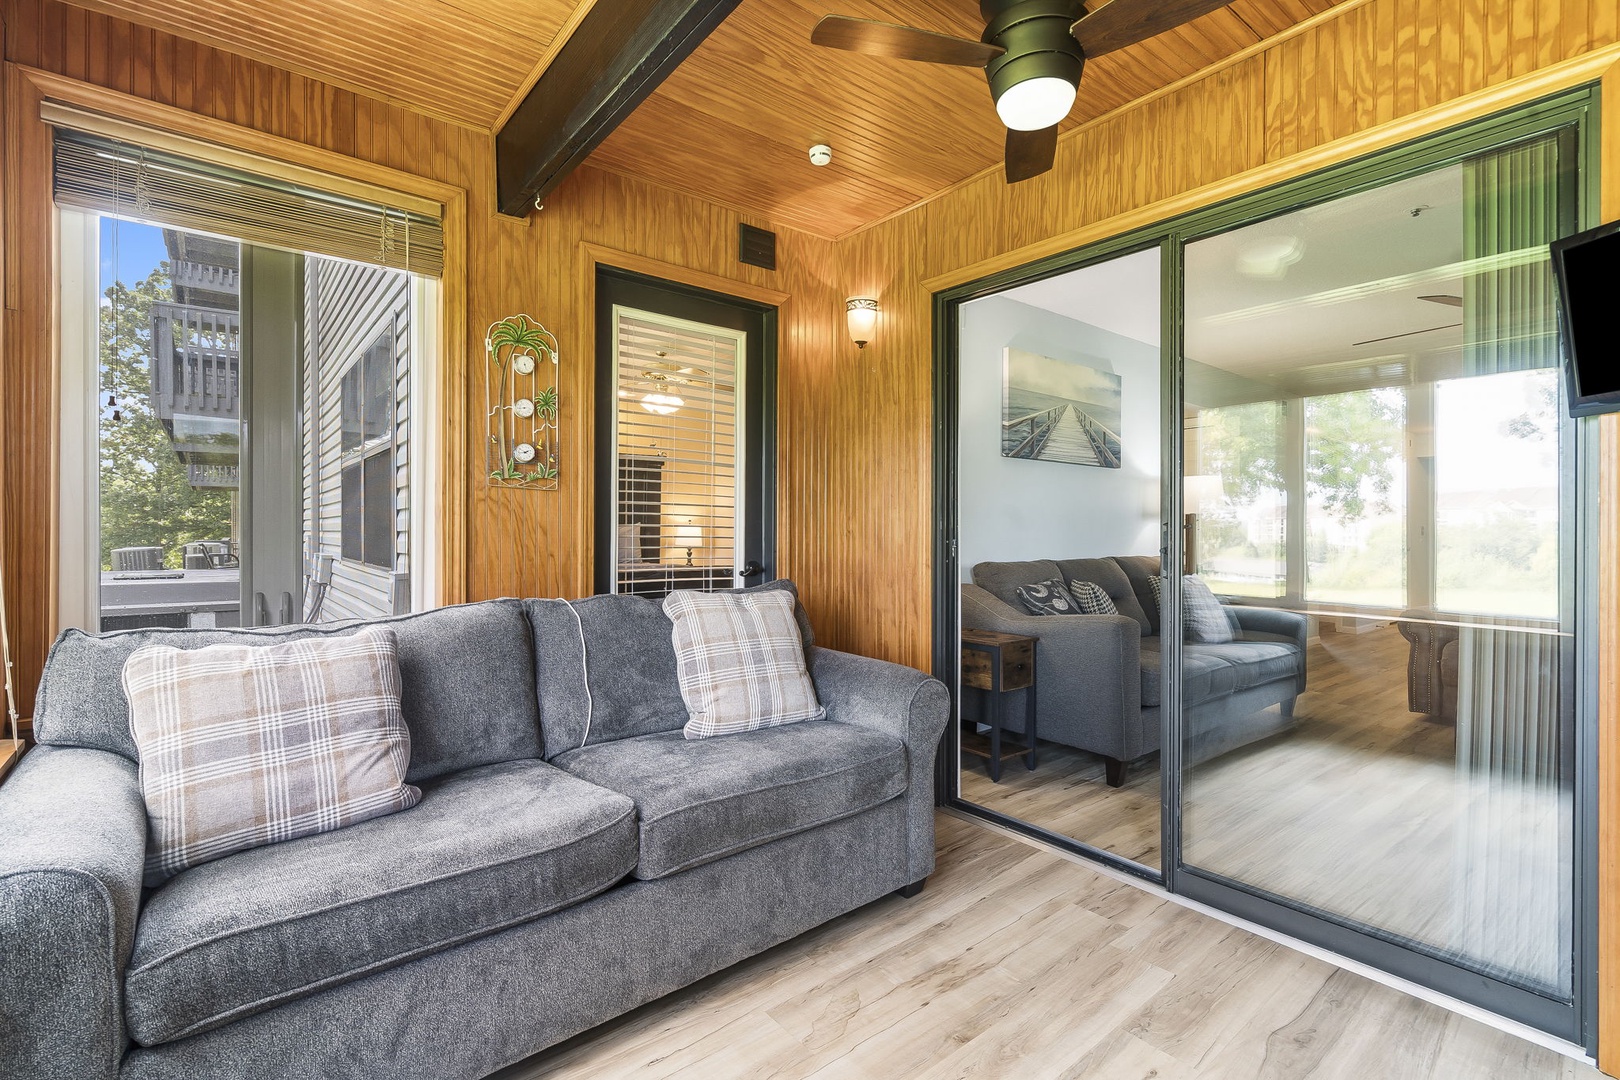 Head into the sunroom & relax with tranquil nature views on the queen sleeper sofa